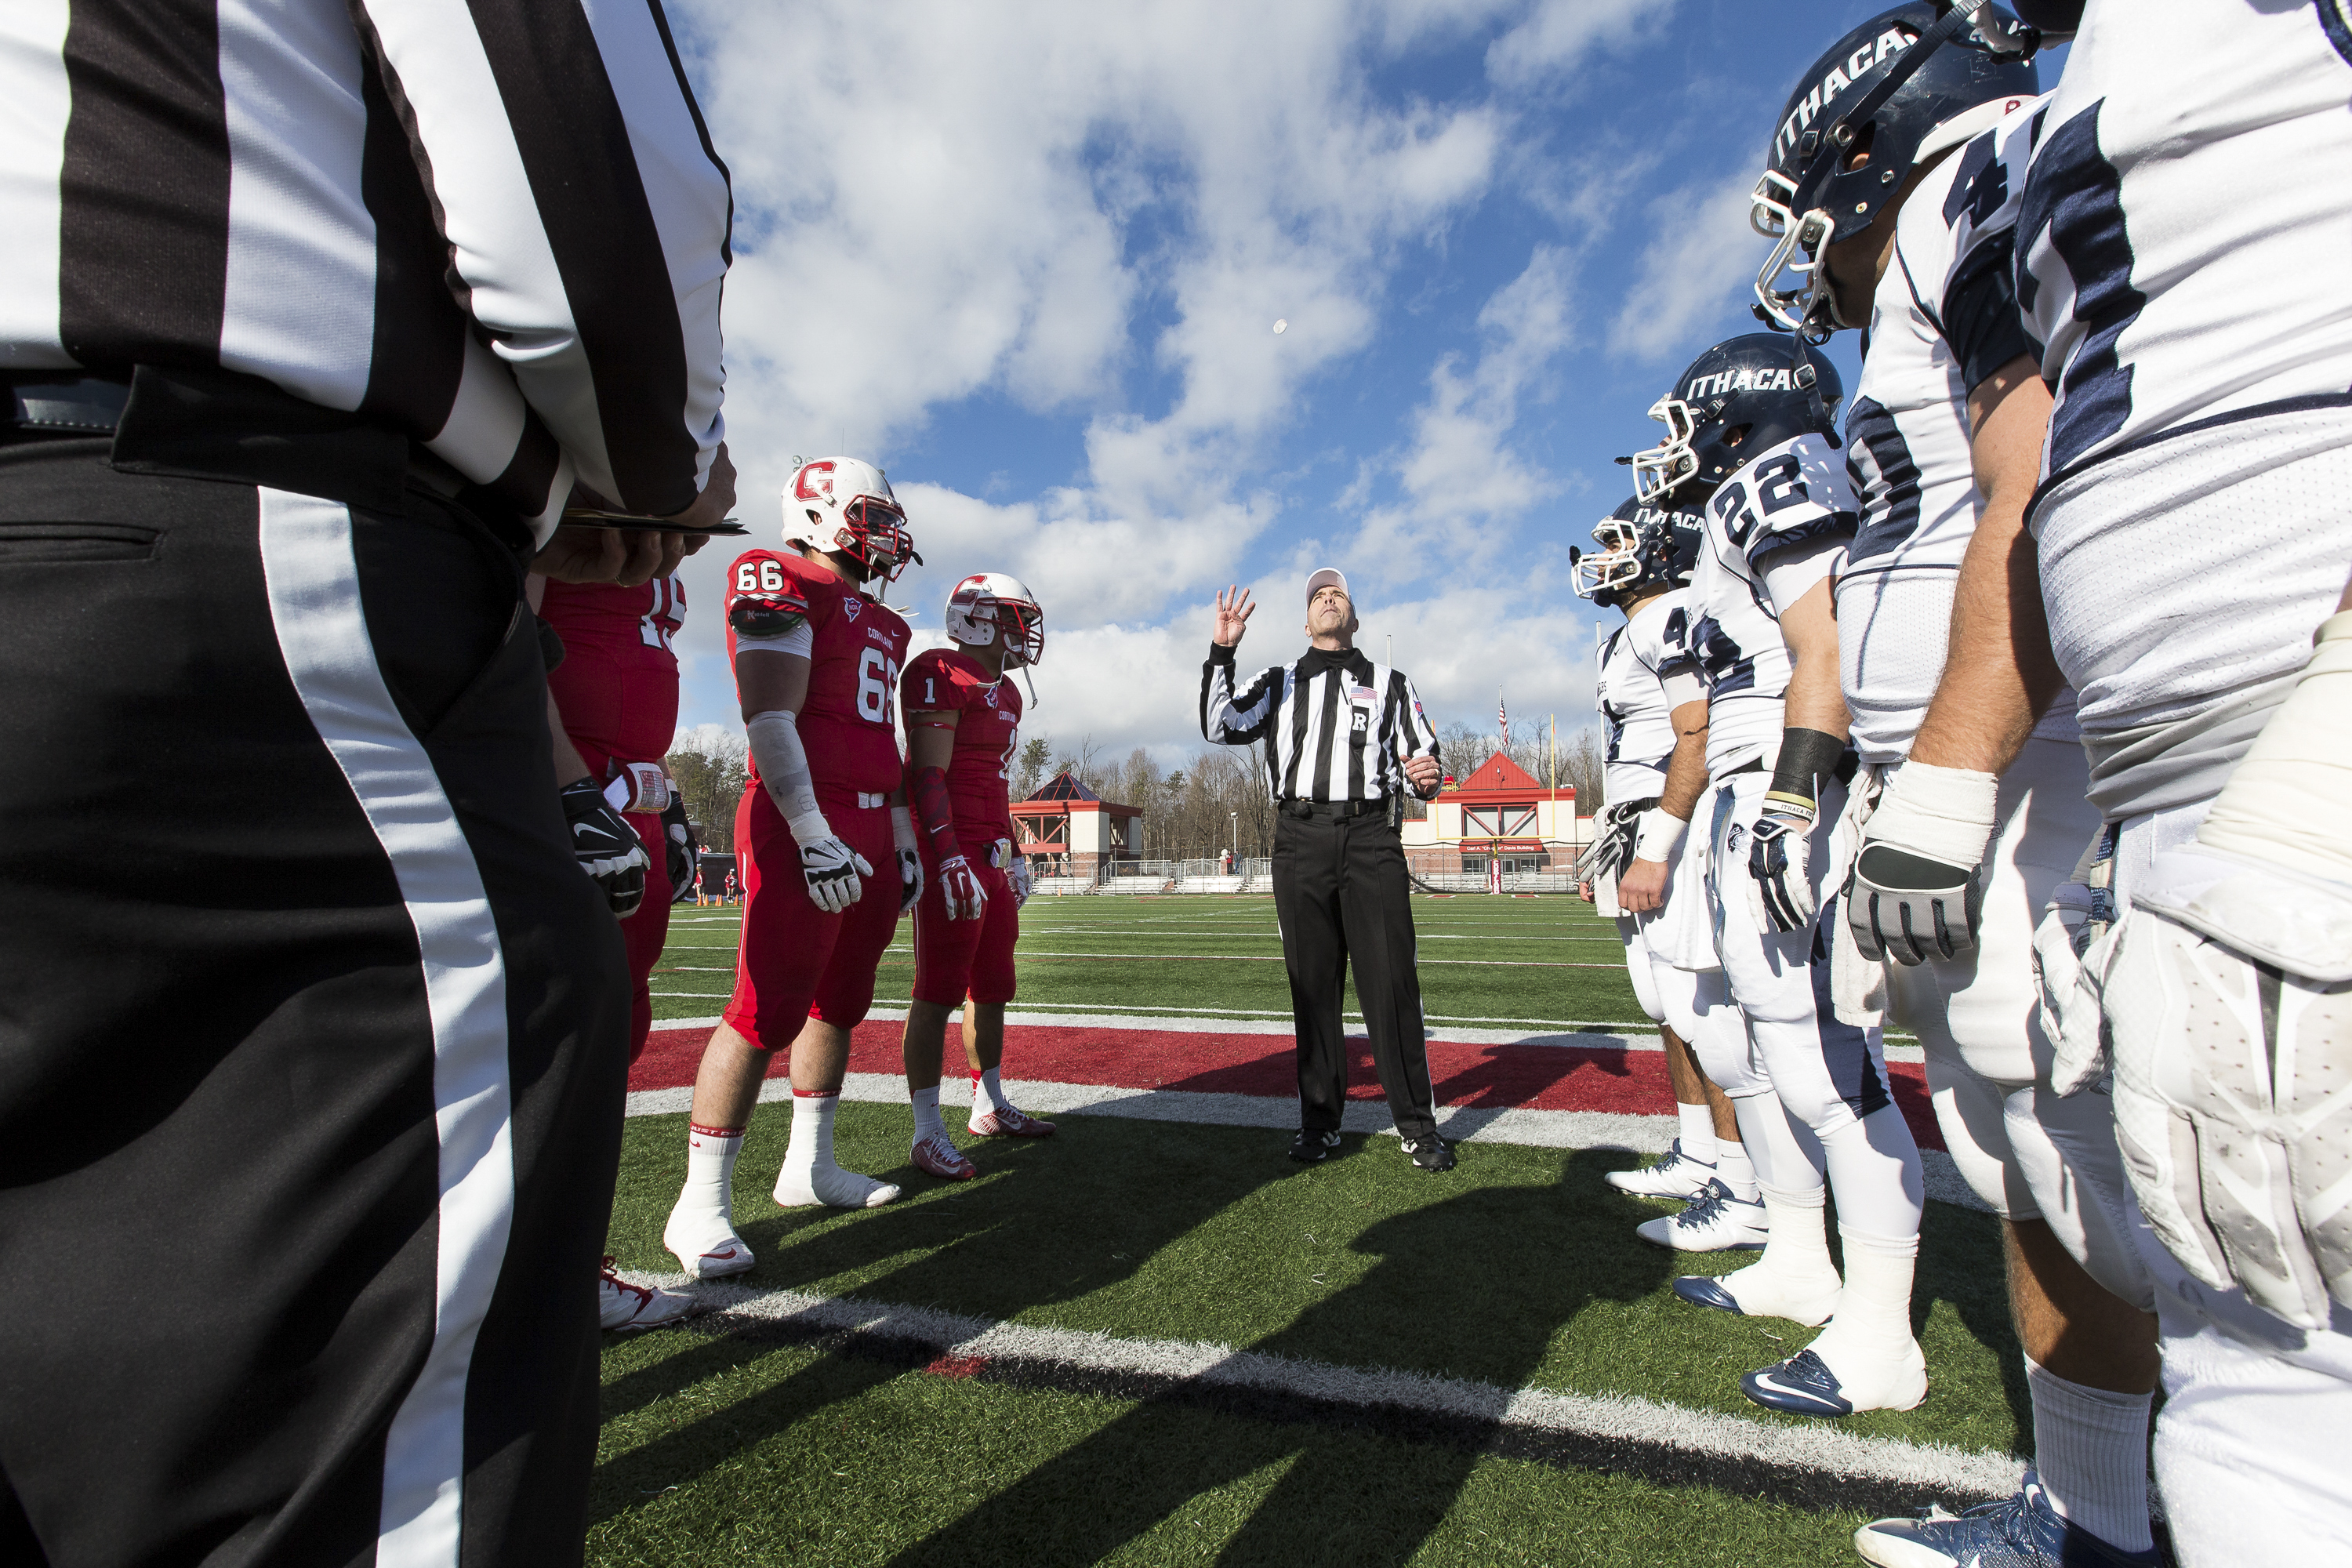 Captains of Ithaca and Cortland football teams  watch the coin toss before the football game on November 15, 2014.